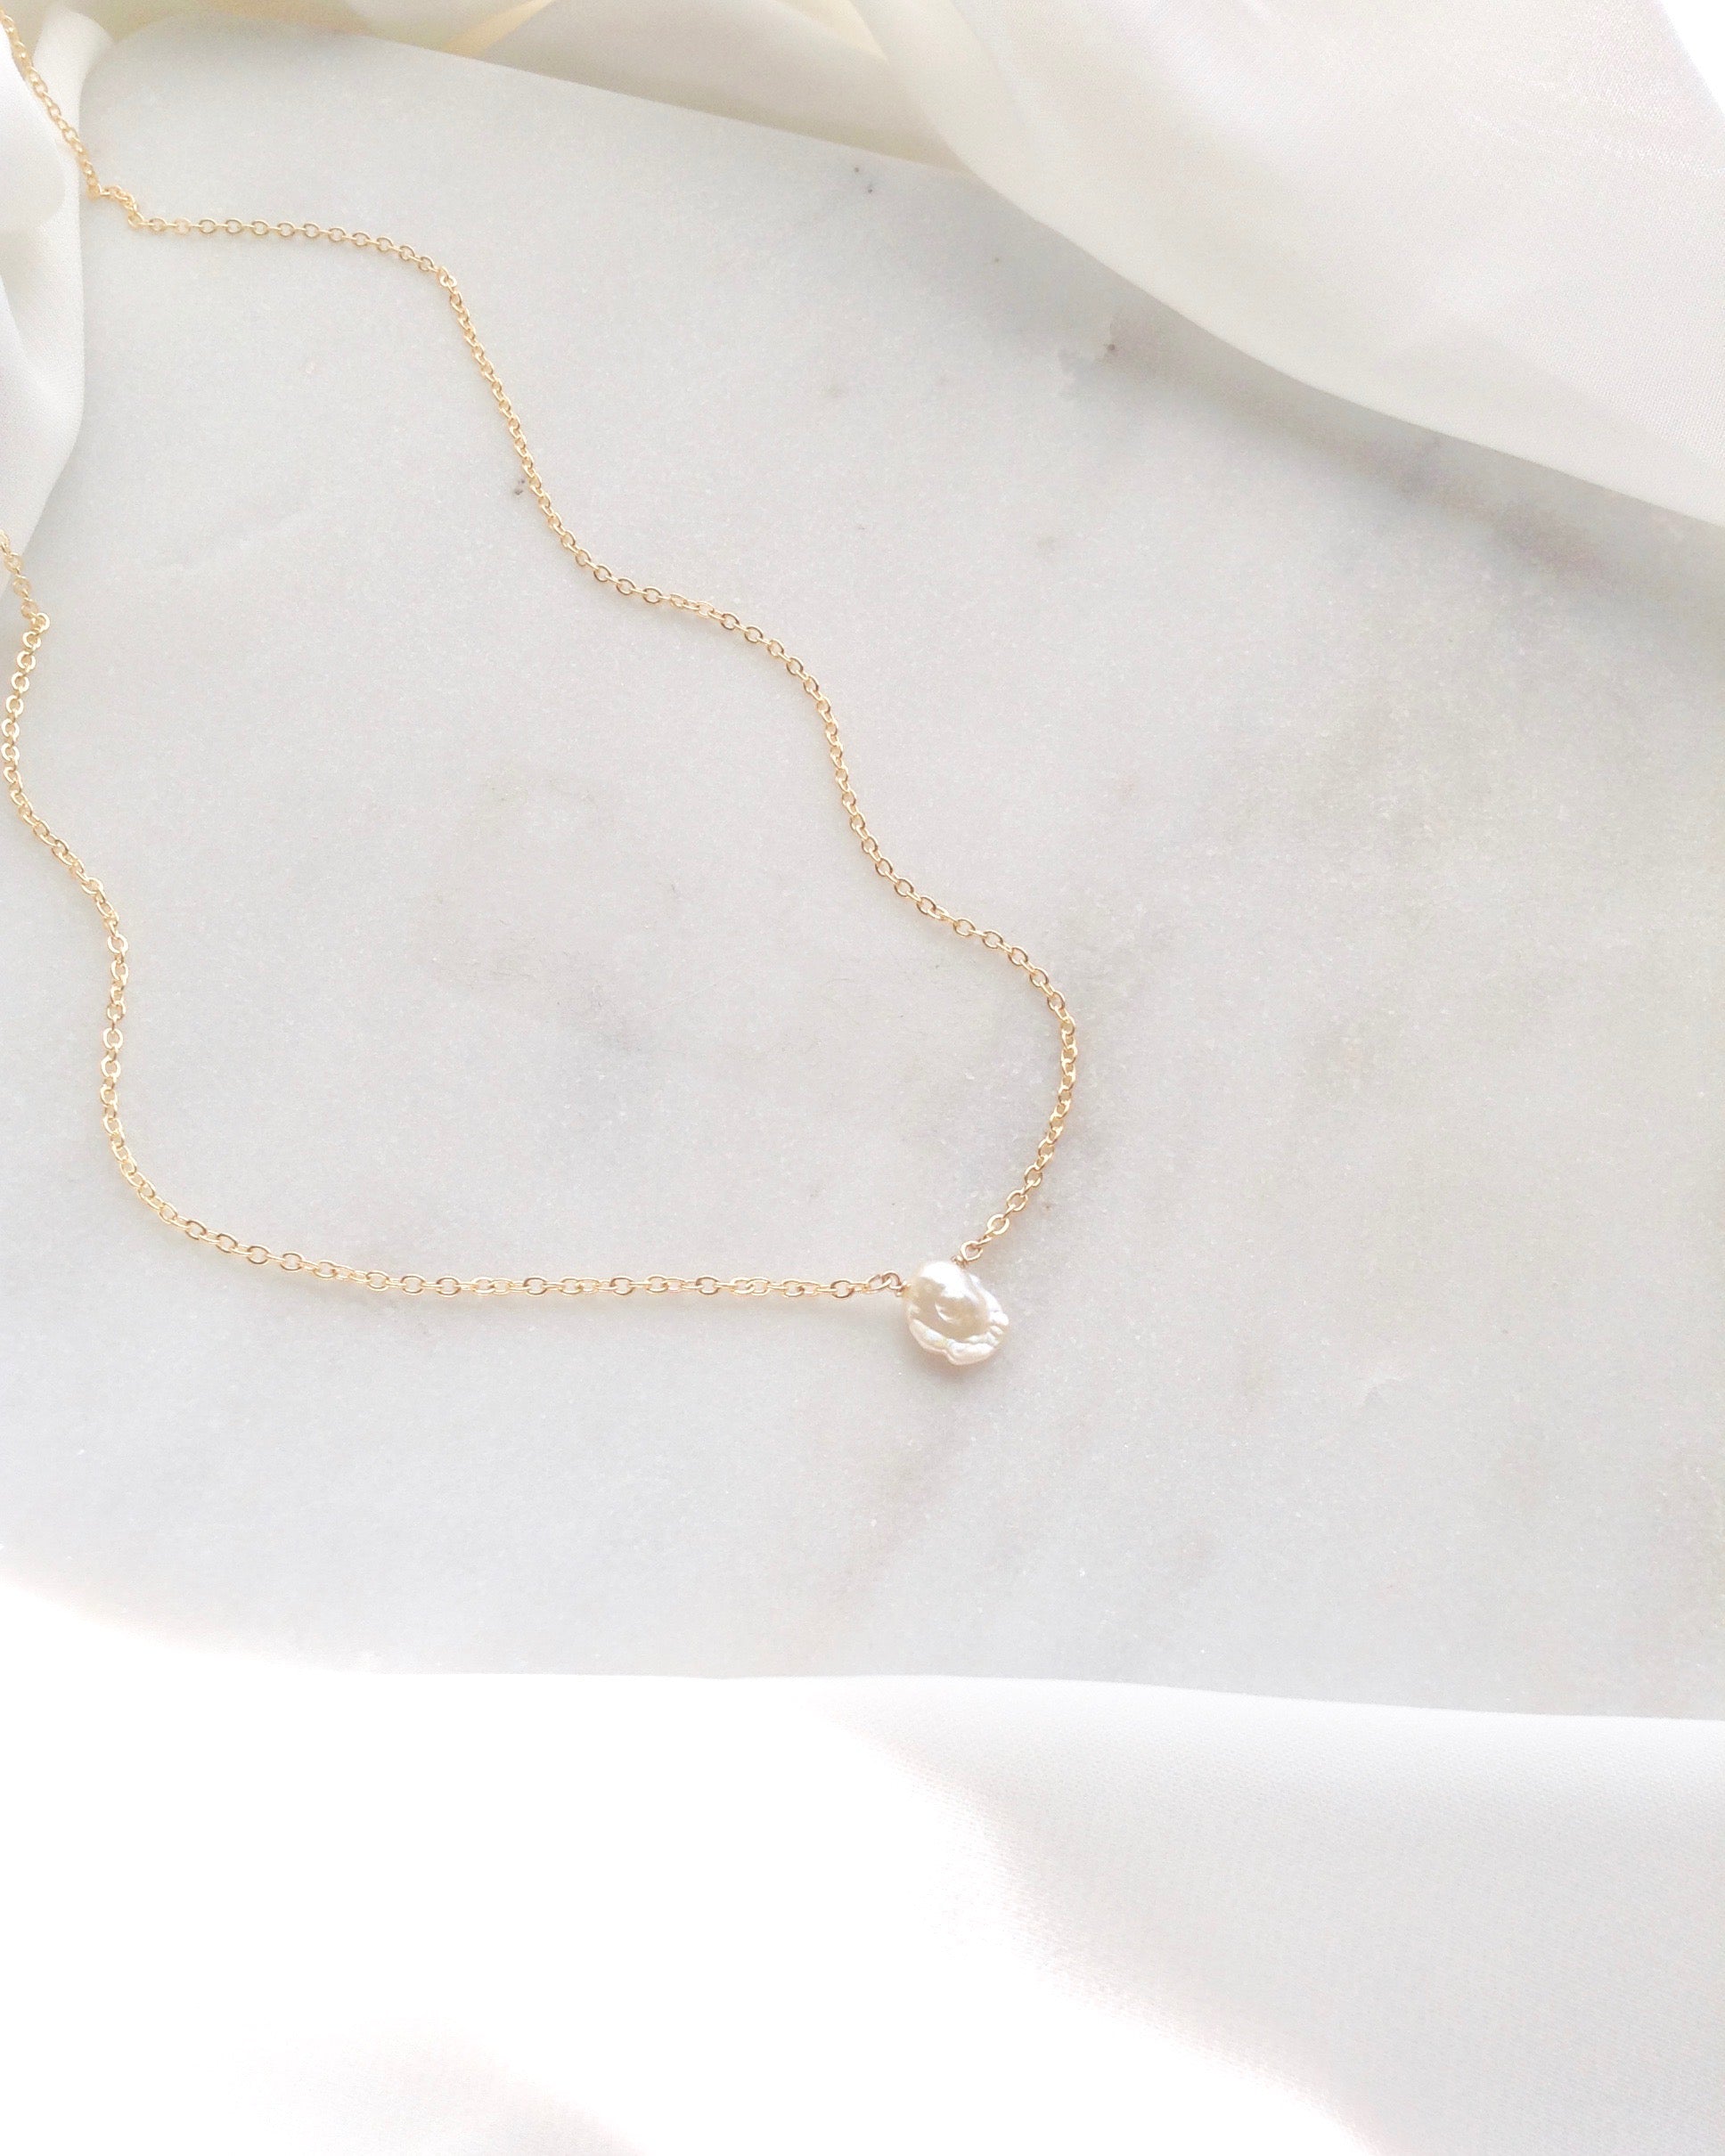 Keshi Single Pearl Necklace in Gold Filled or Sterling Silver | IB Jewelry